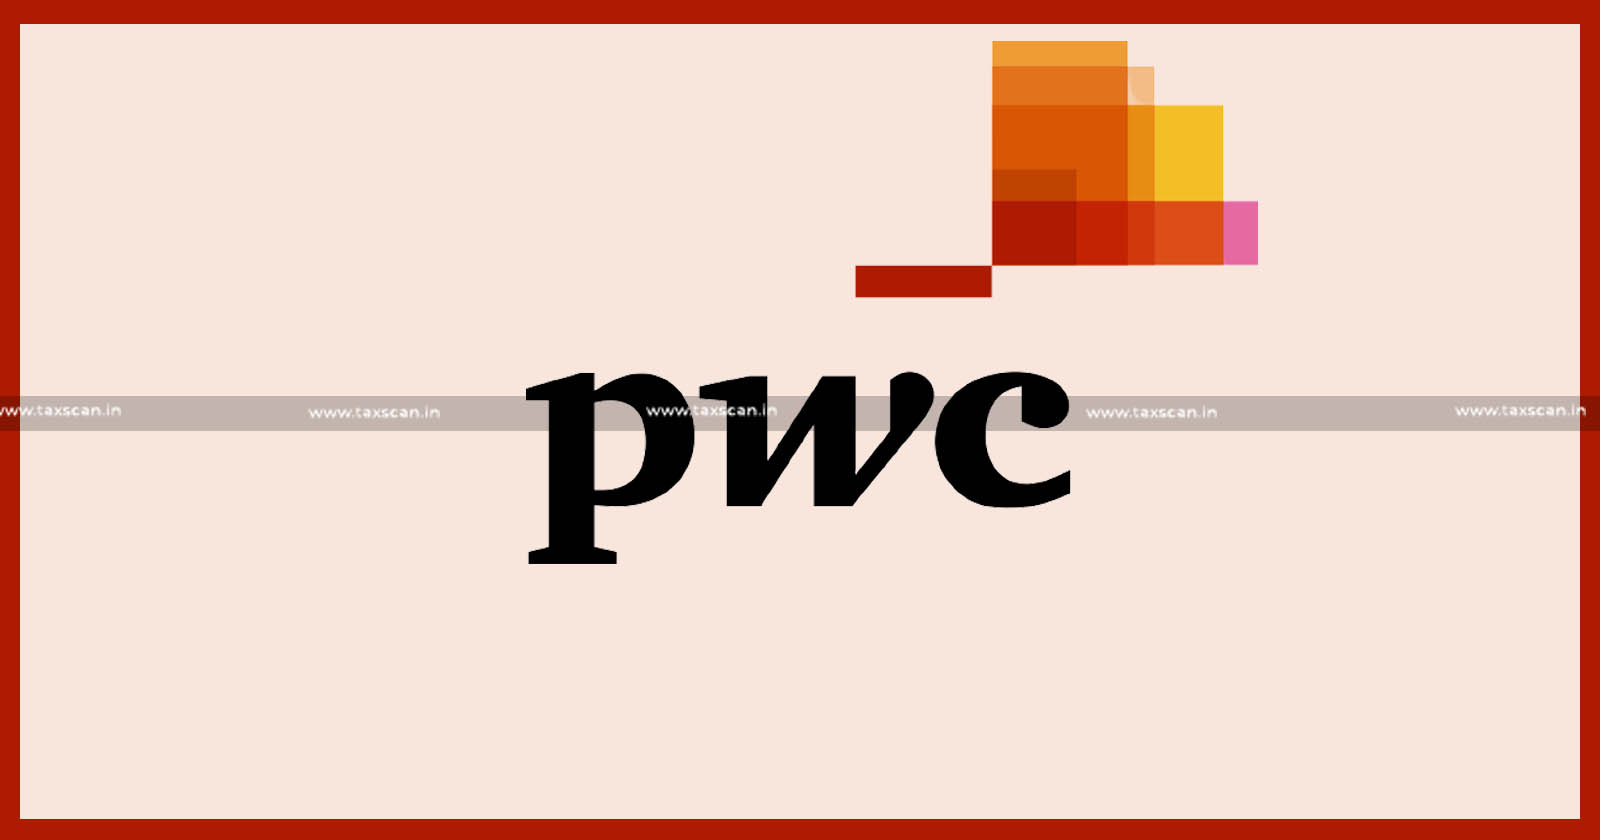 PwC resigns as Paytms Auditor - SR Batliboi and Associates - Paytms Auditor - PwC resigns - taxscan